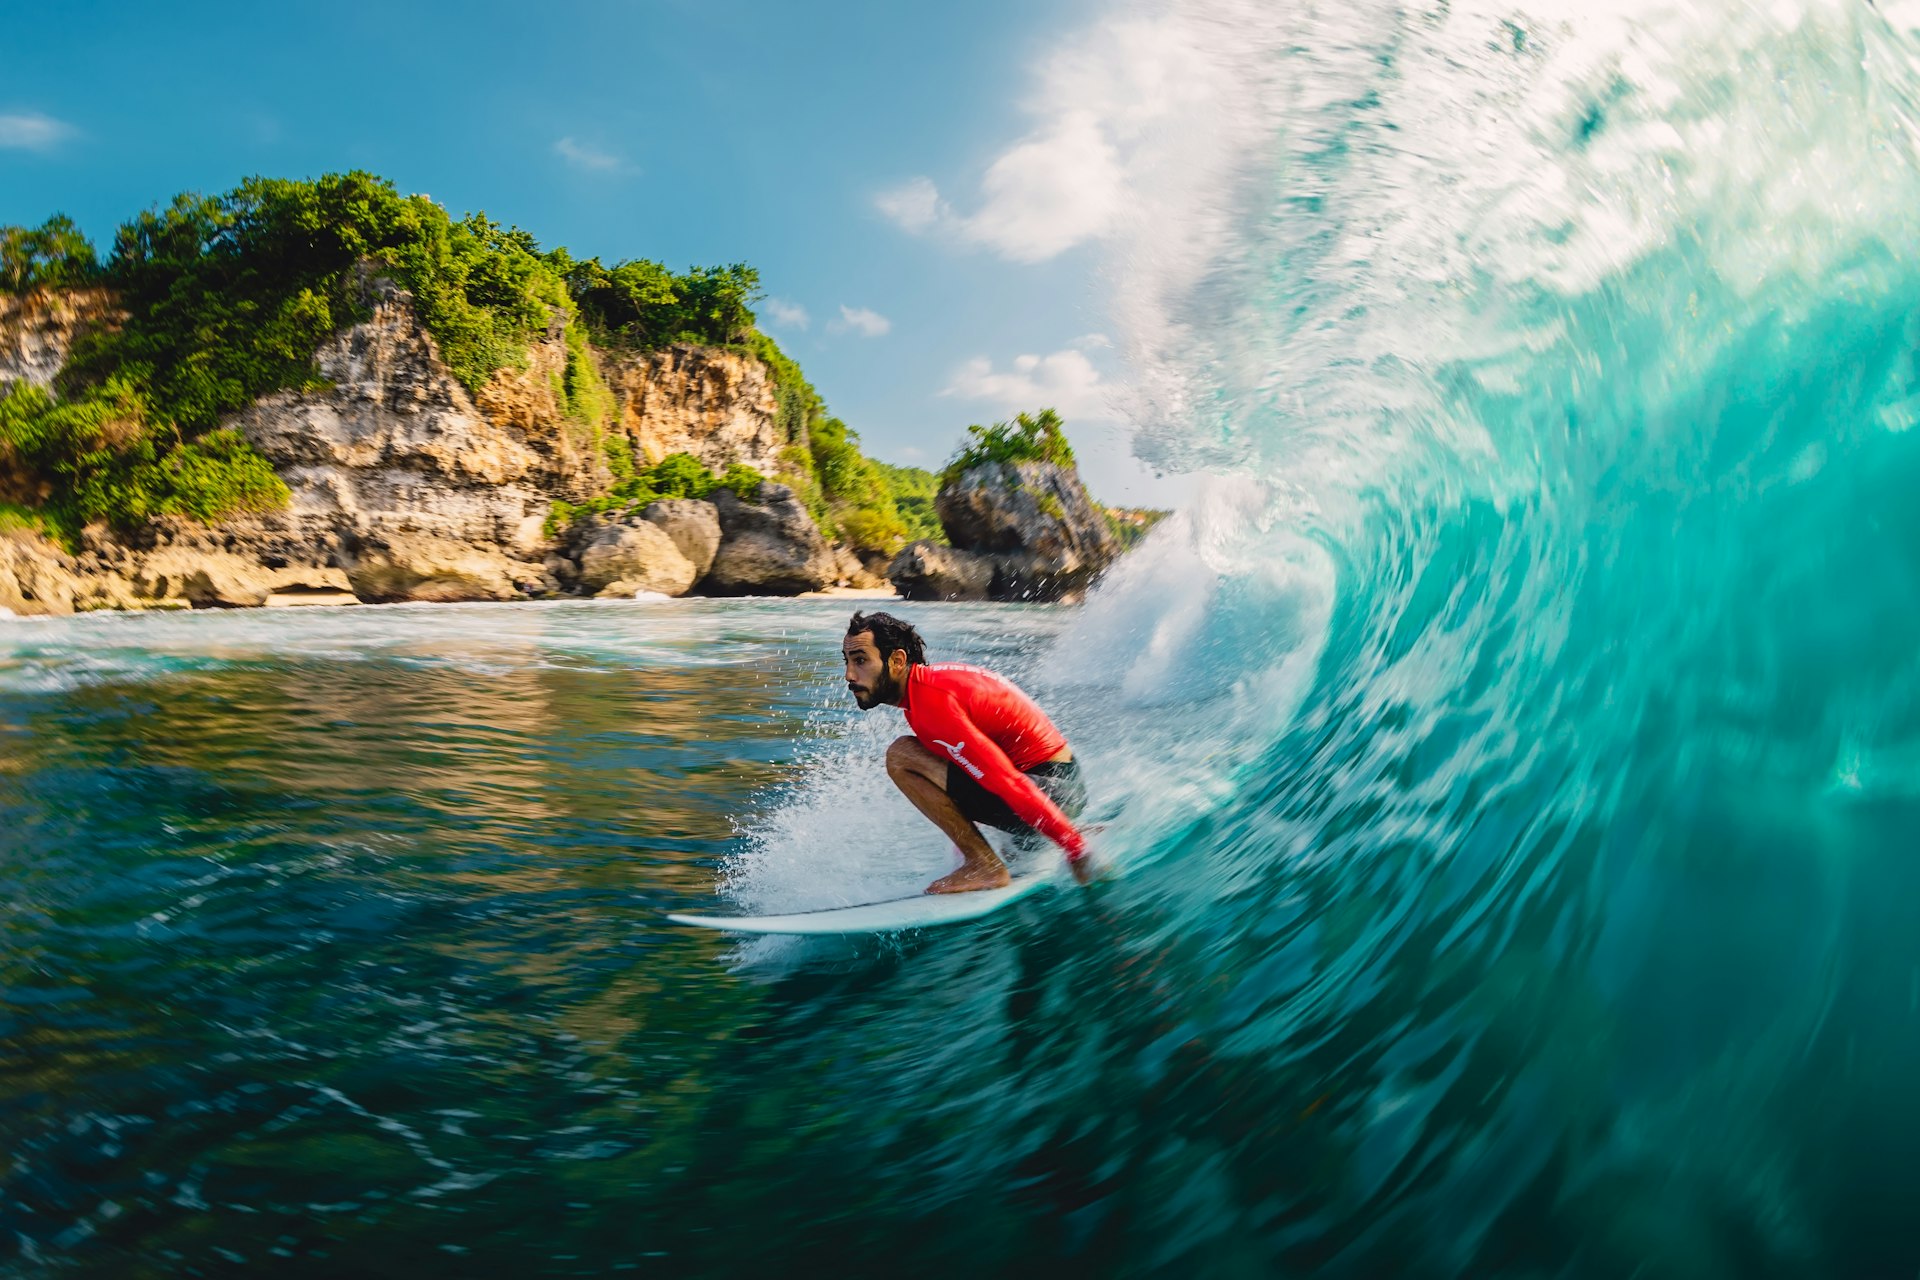 Surfer riding in a barrel wave off the coast of Bali, Indonesia.